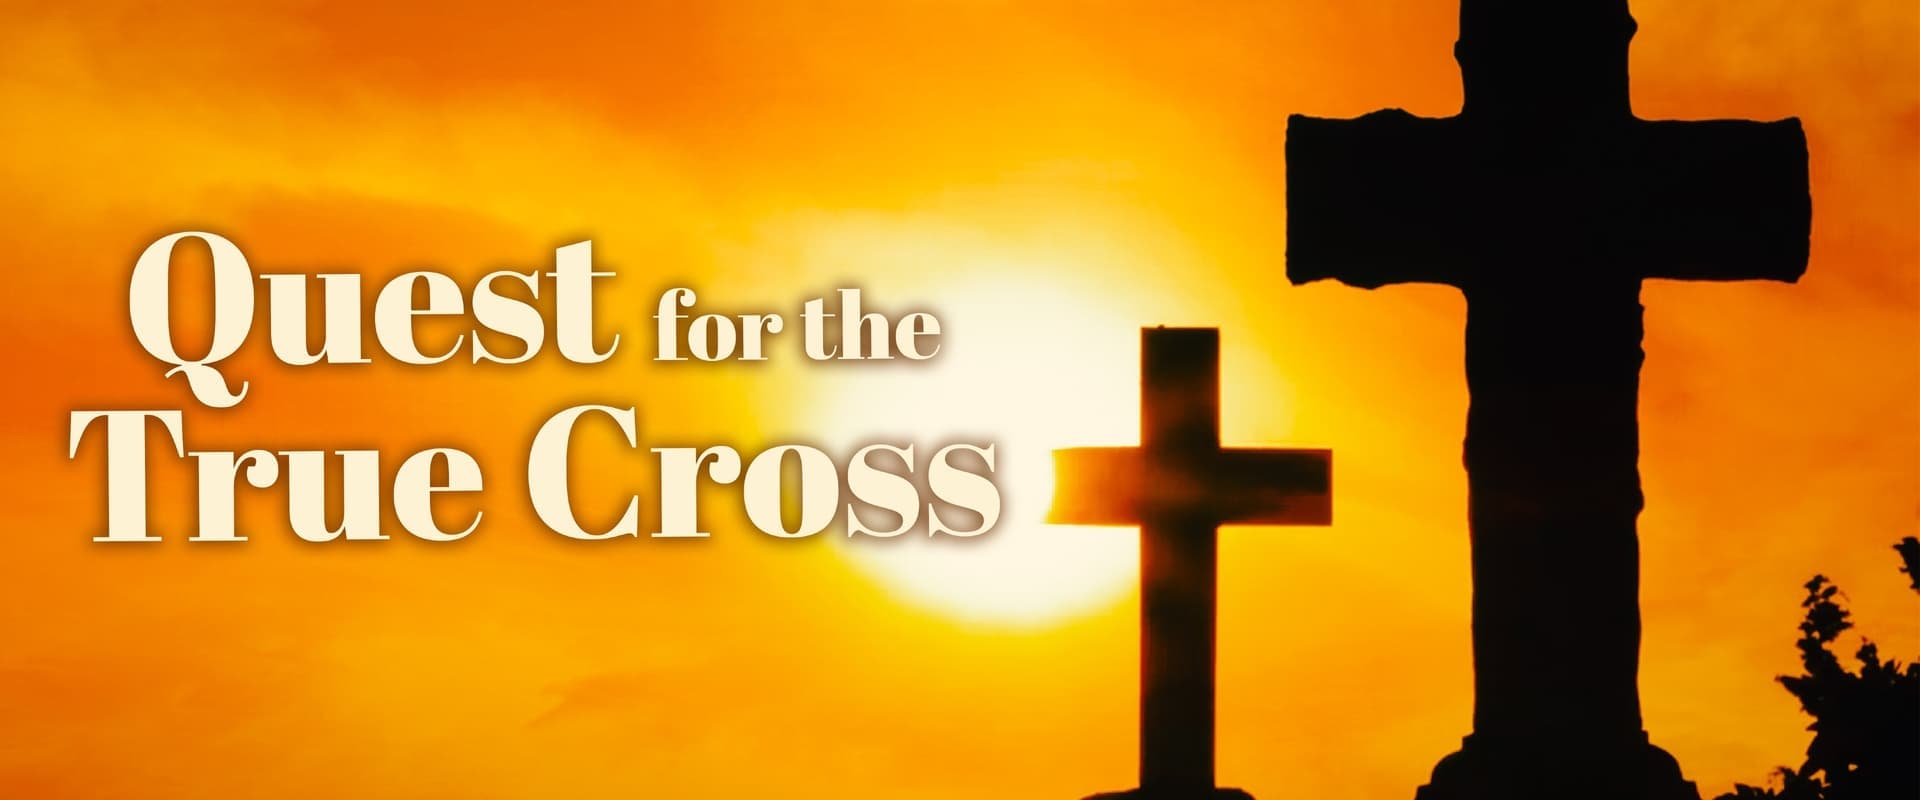 The Quest for the True Cross